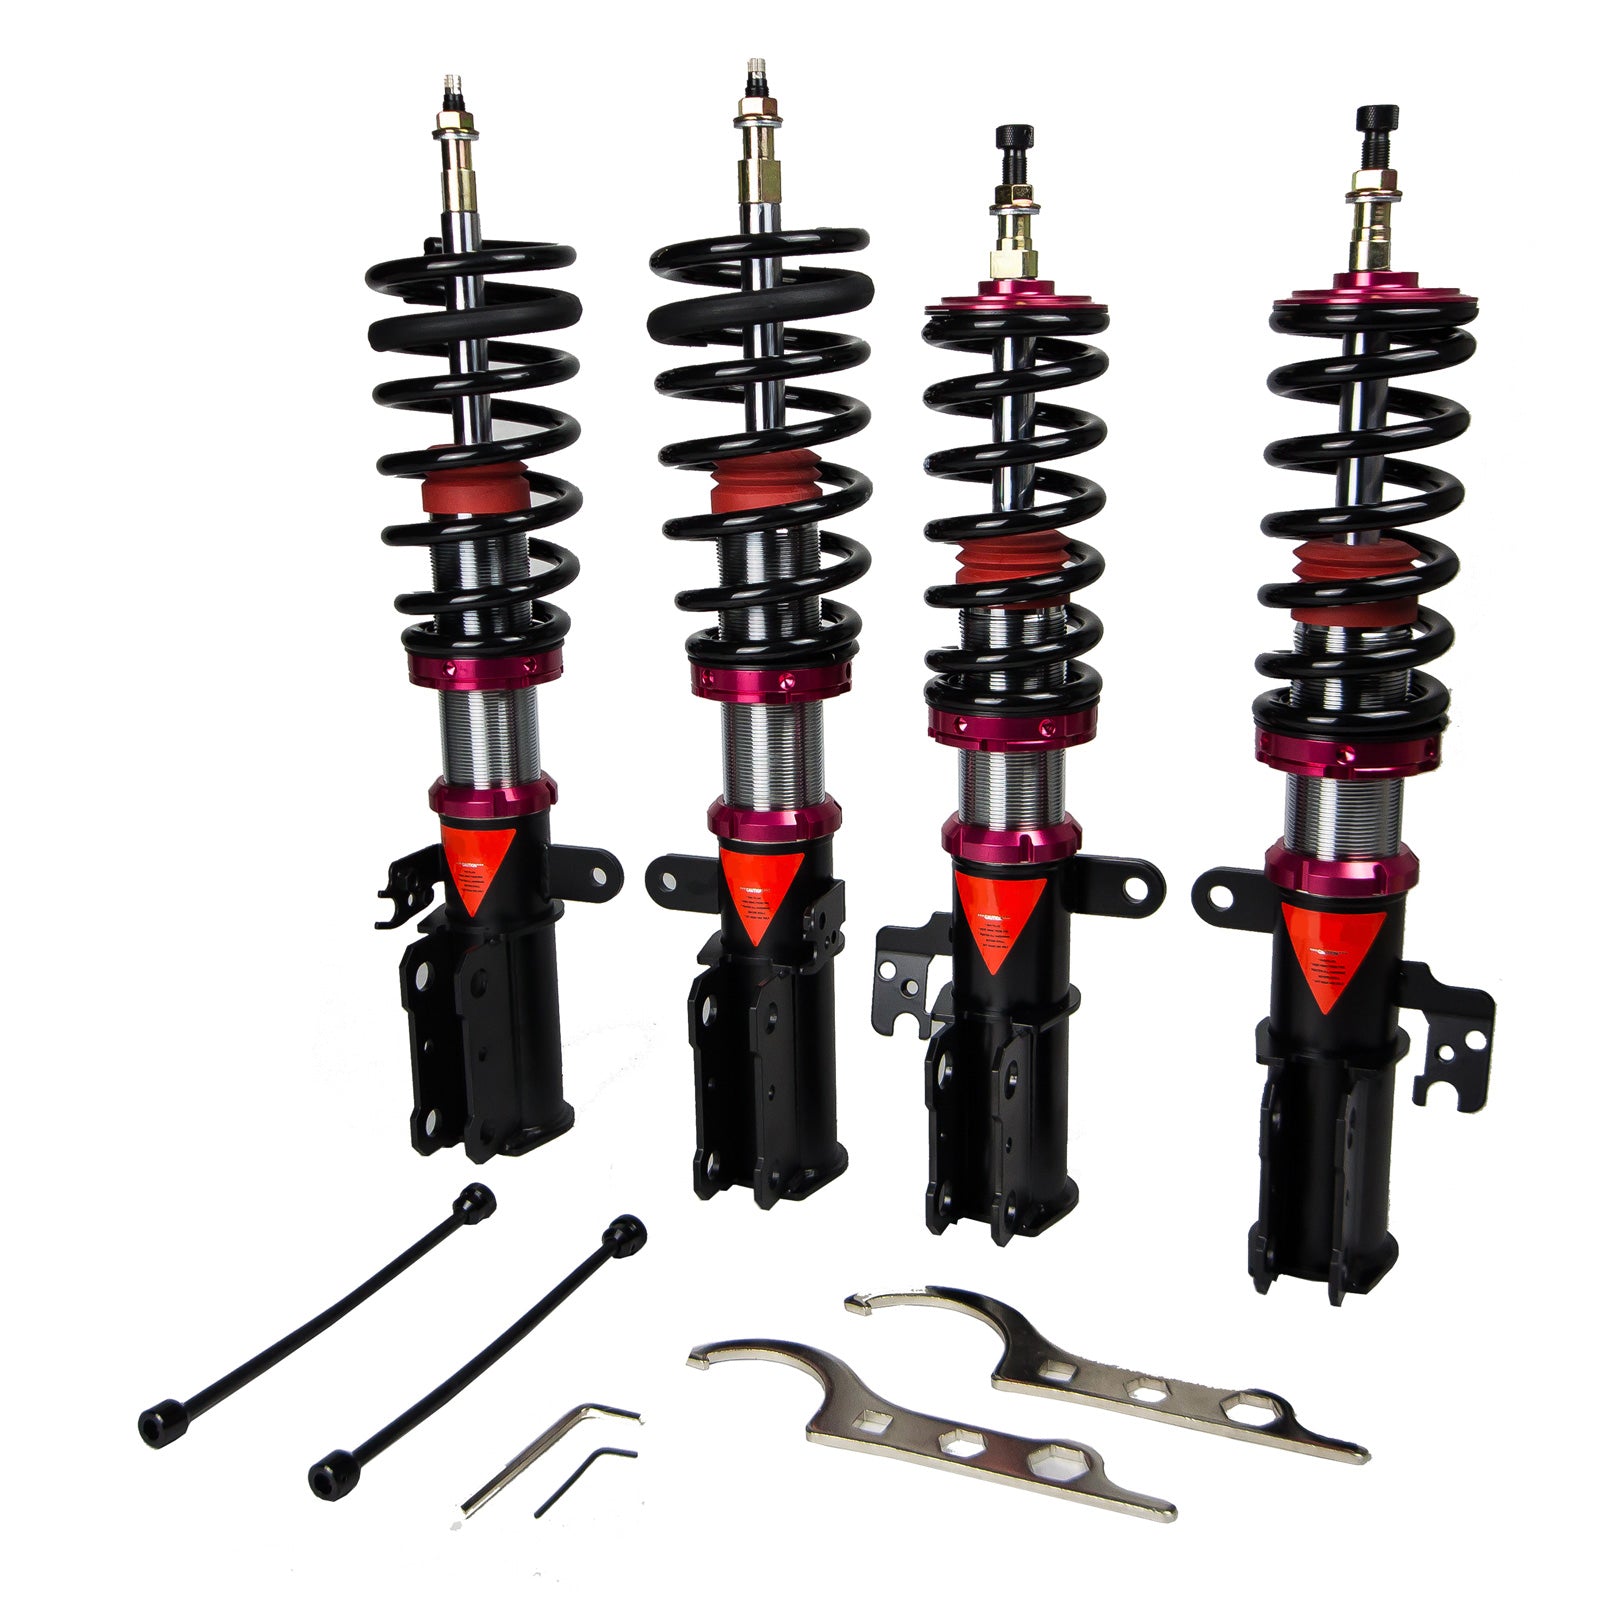 MMX3440-D MAXX Coilovers Lowering Kit, Fully Adjustable, Ride Height, 40 Clicks Rebound Settings, Toyota Avalon(XV20/MCV20) 97-03